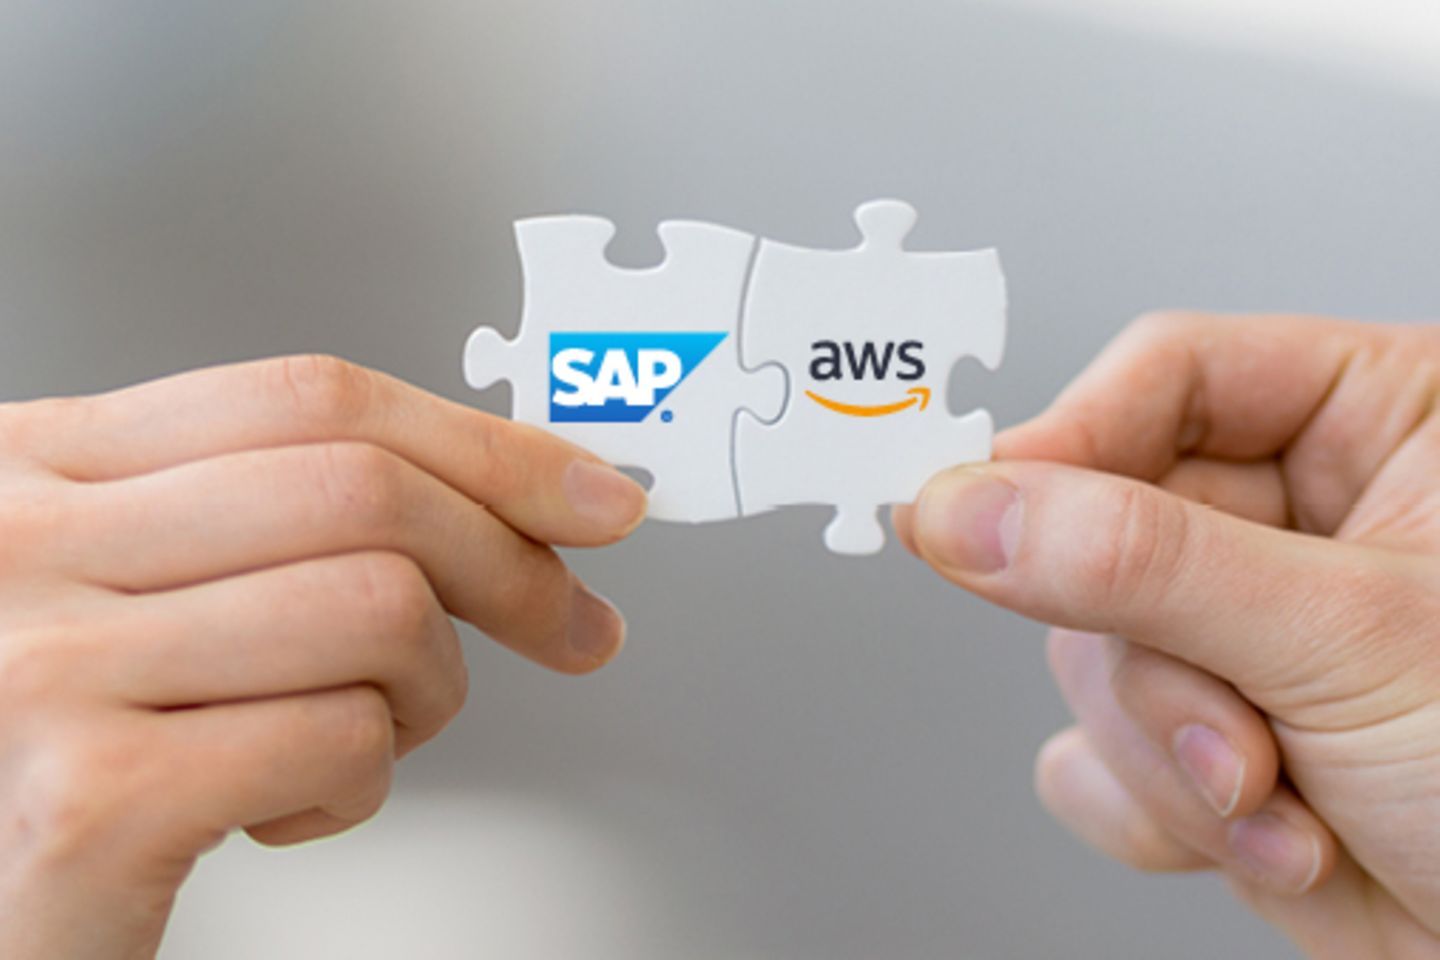 Hands hold puzzle pieces with SAP and AWS logos fitting together.